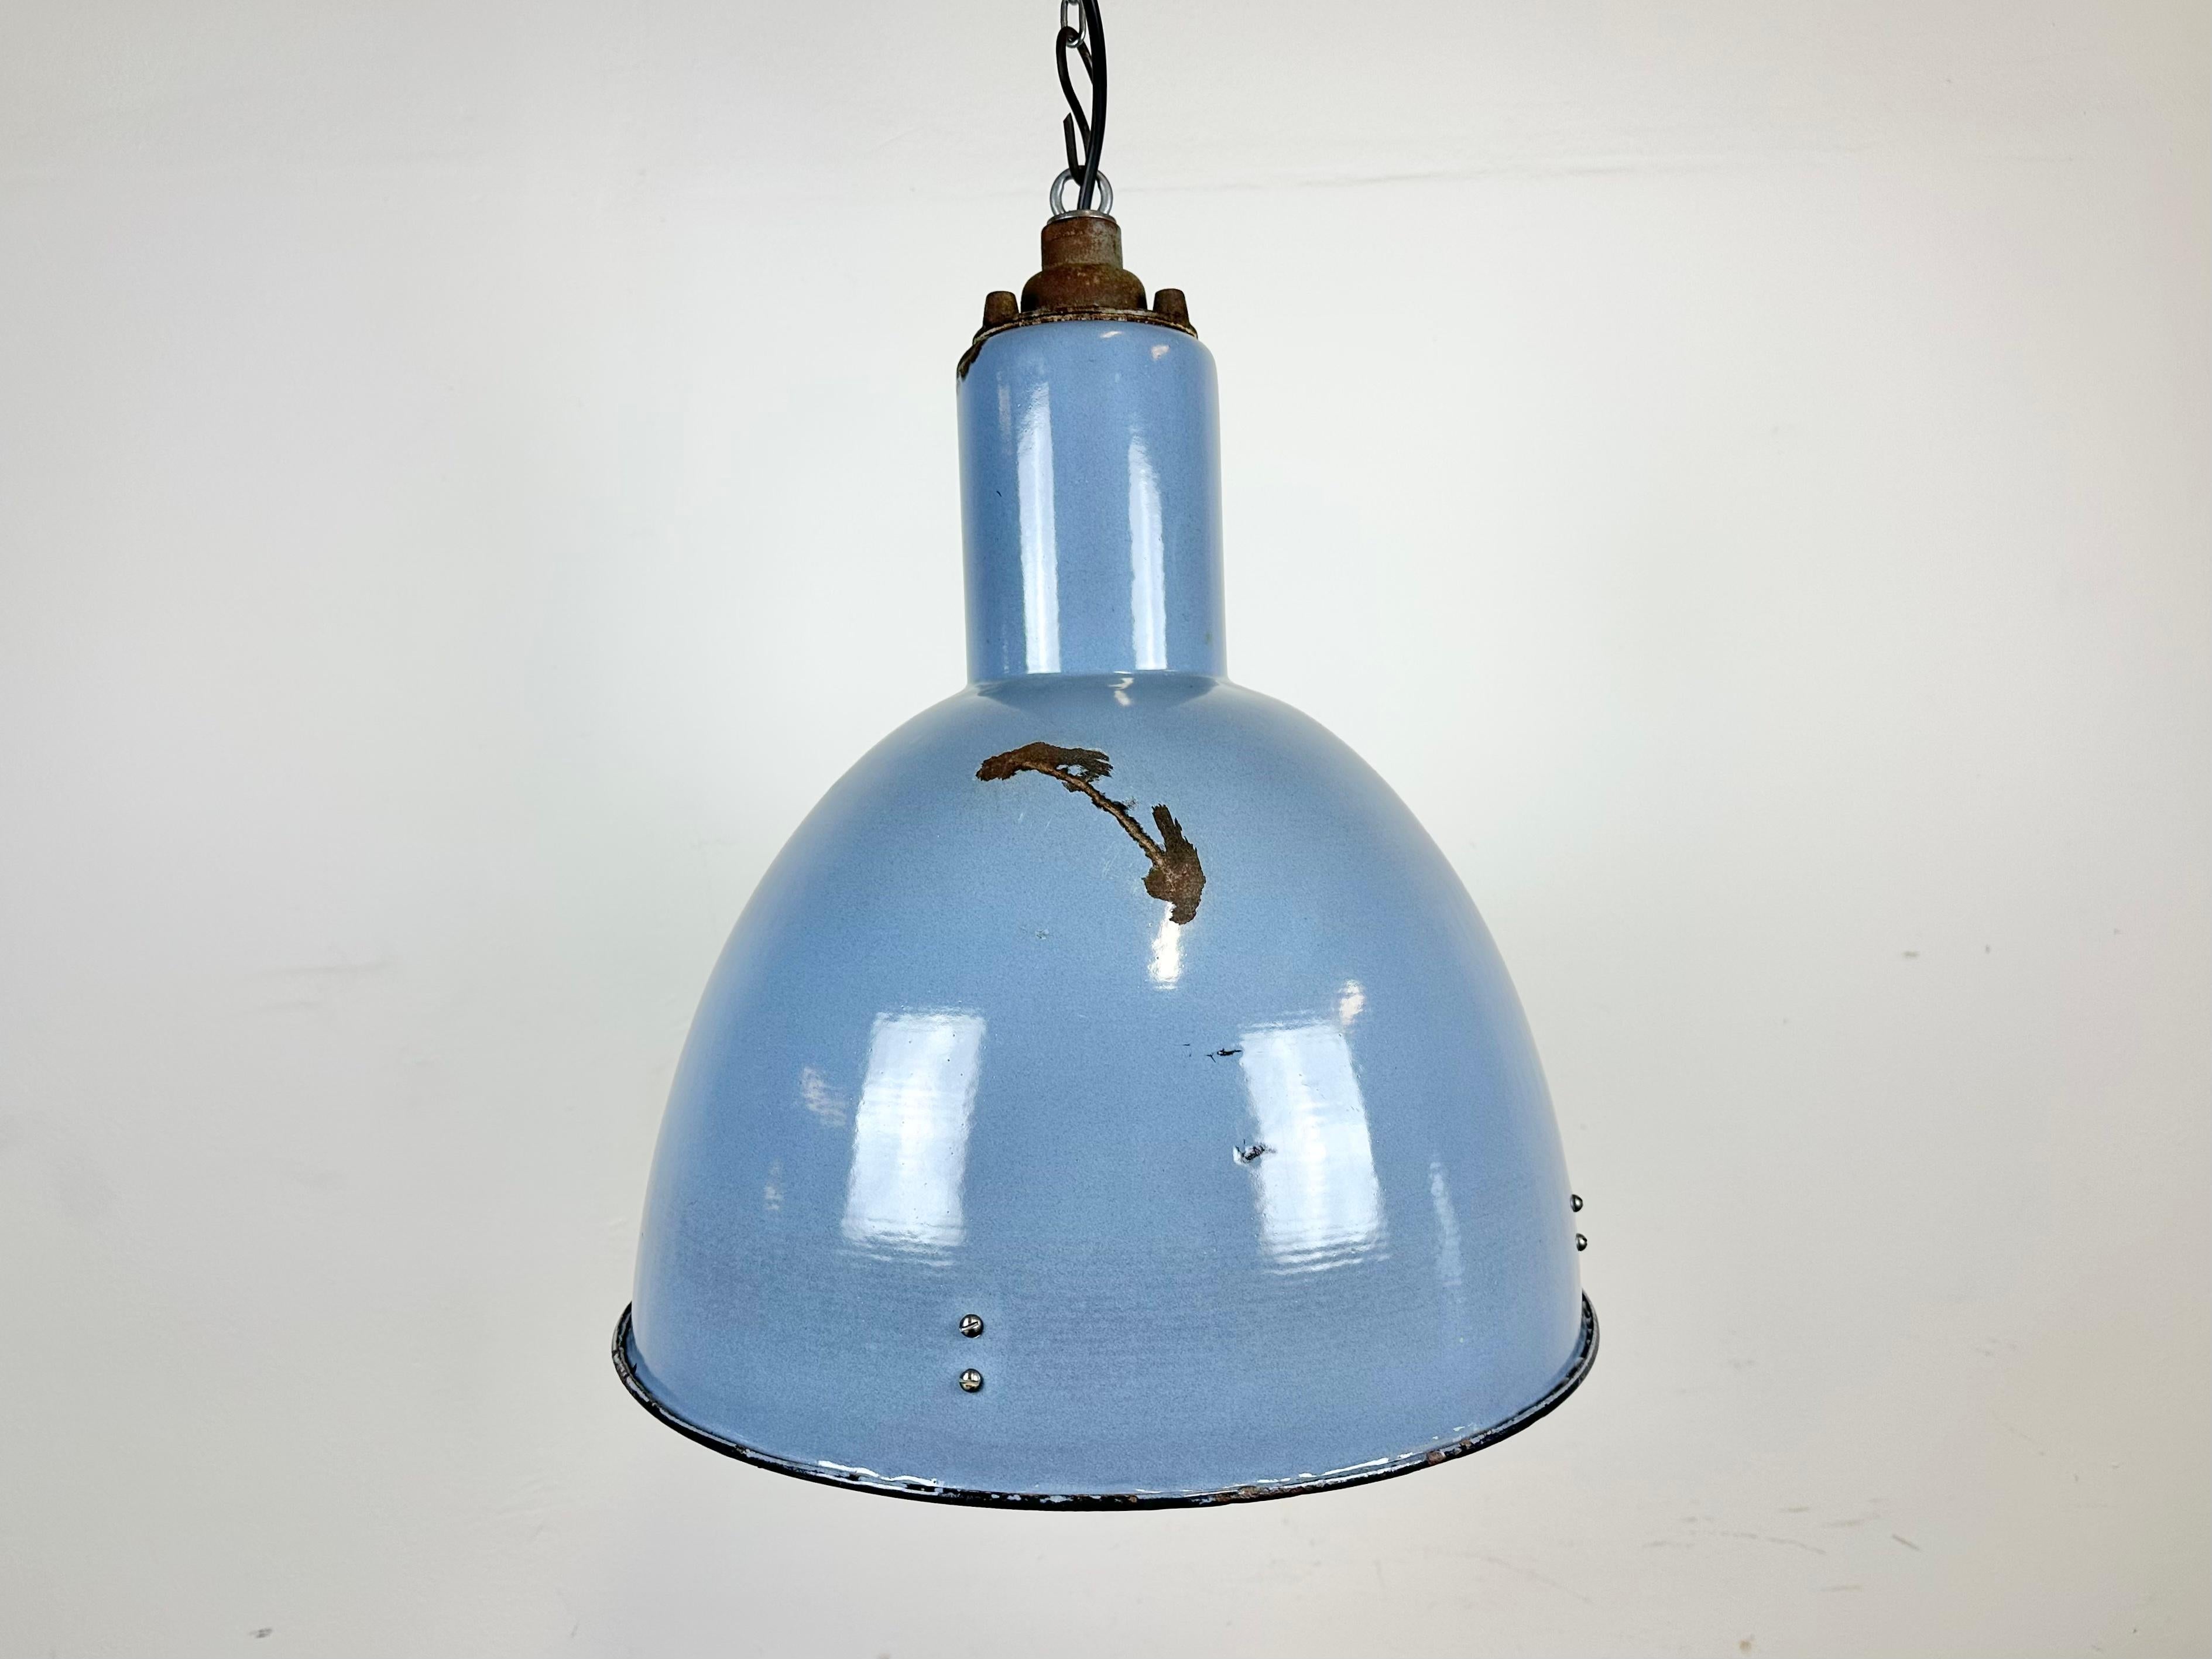 Vintage Industrial light in Bauhaus style made in former Czechoslovakia during the 1950s.It features a blue ( grey ) enamel body with white enamel interior and cast iron top. New porcelain socket requires E27/ E26 lightbulbs. New wire. The weight of